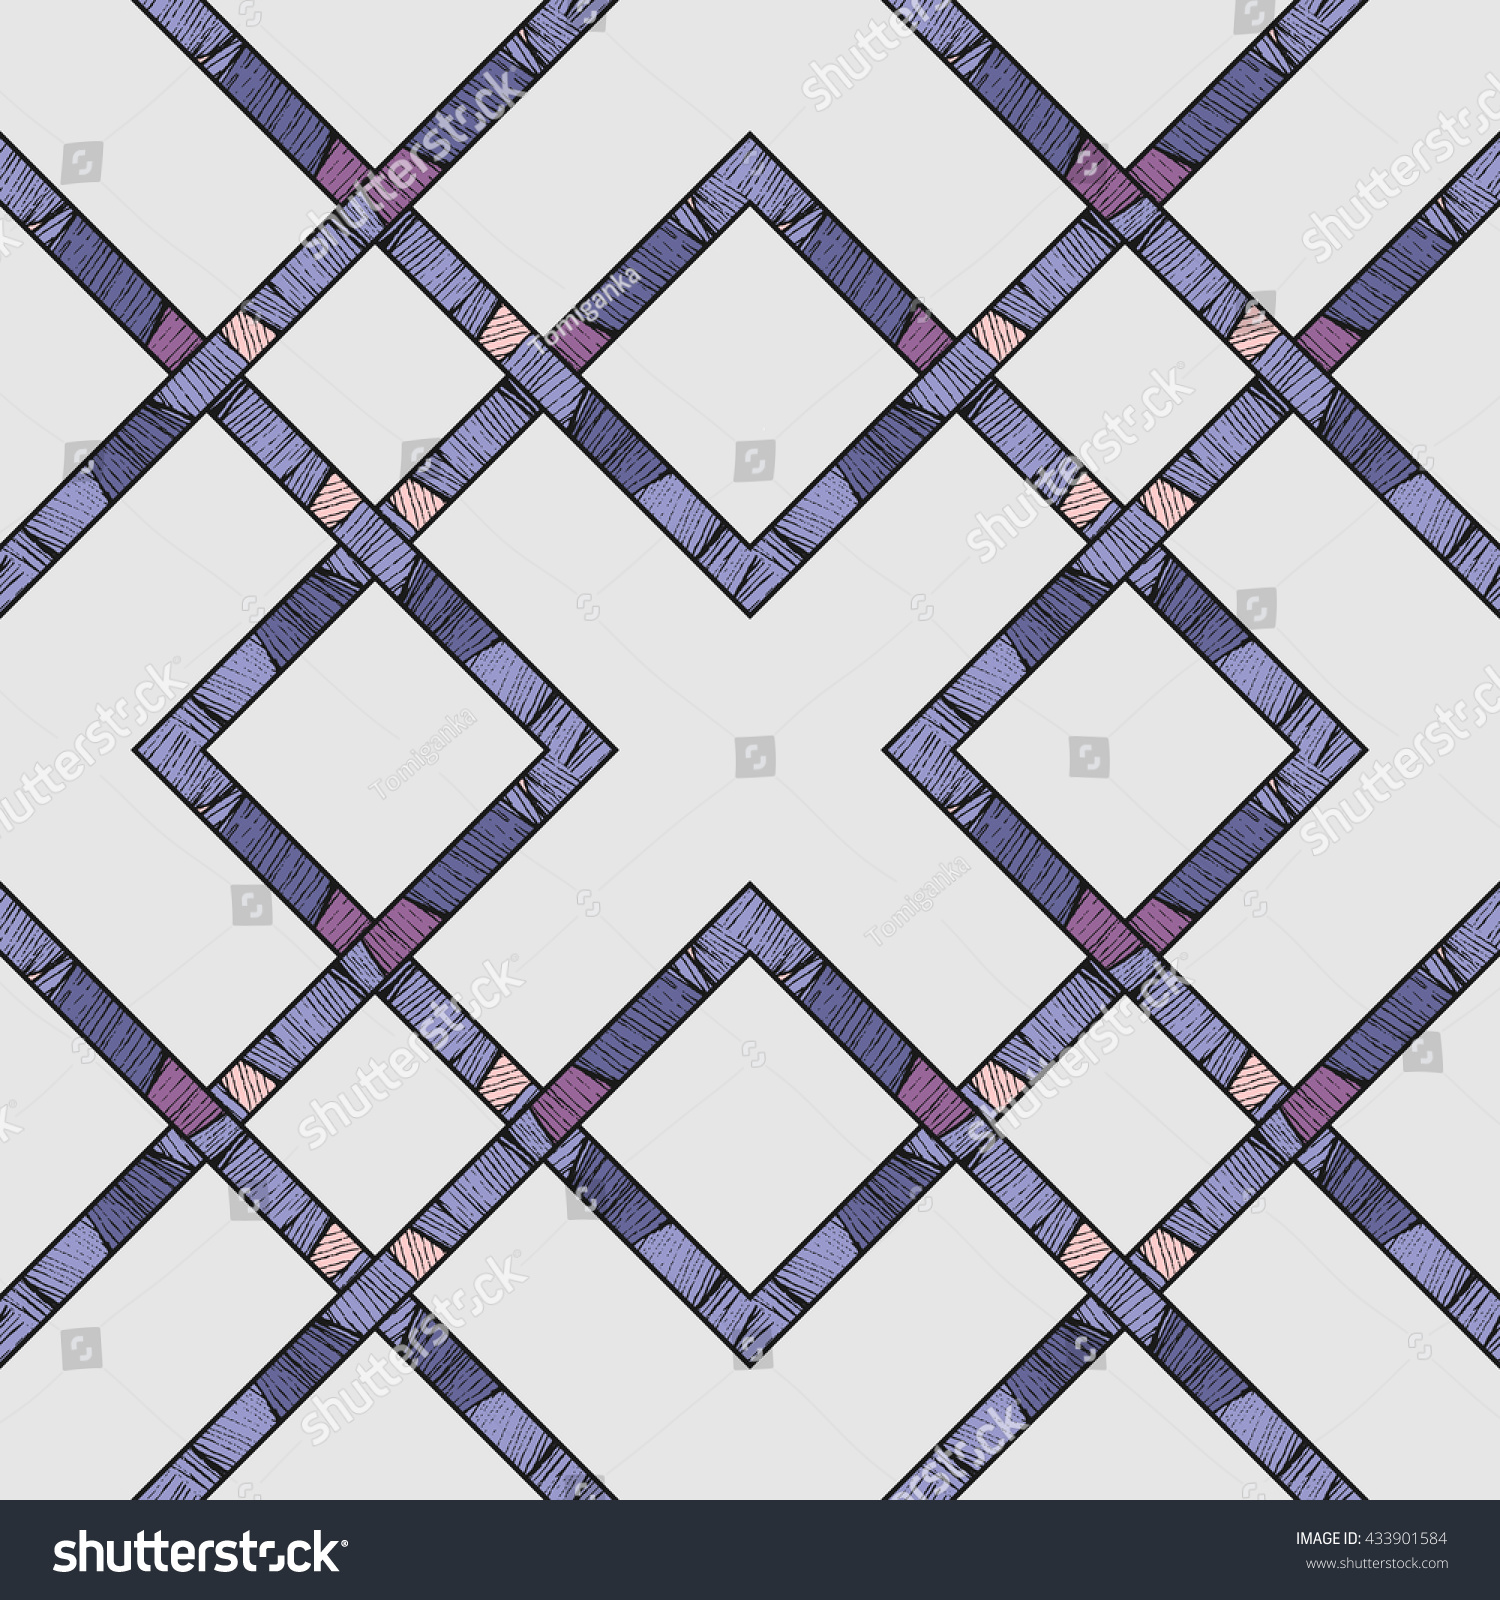 Seamless Vector Geometric Design Abstract Pattern Stock Vector ...